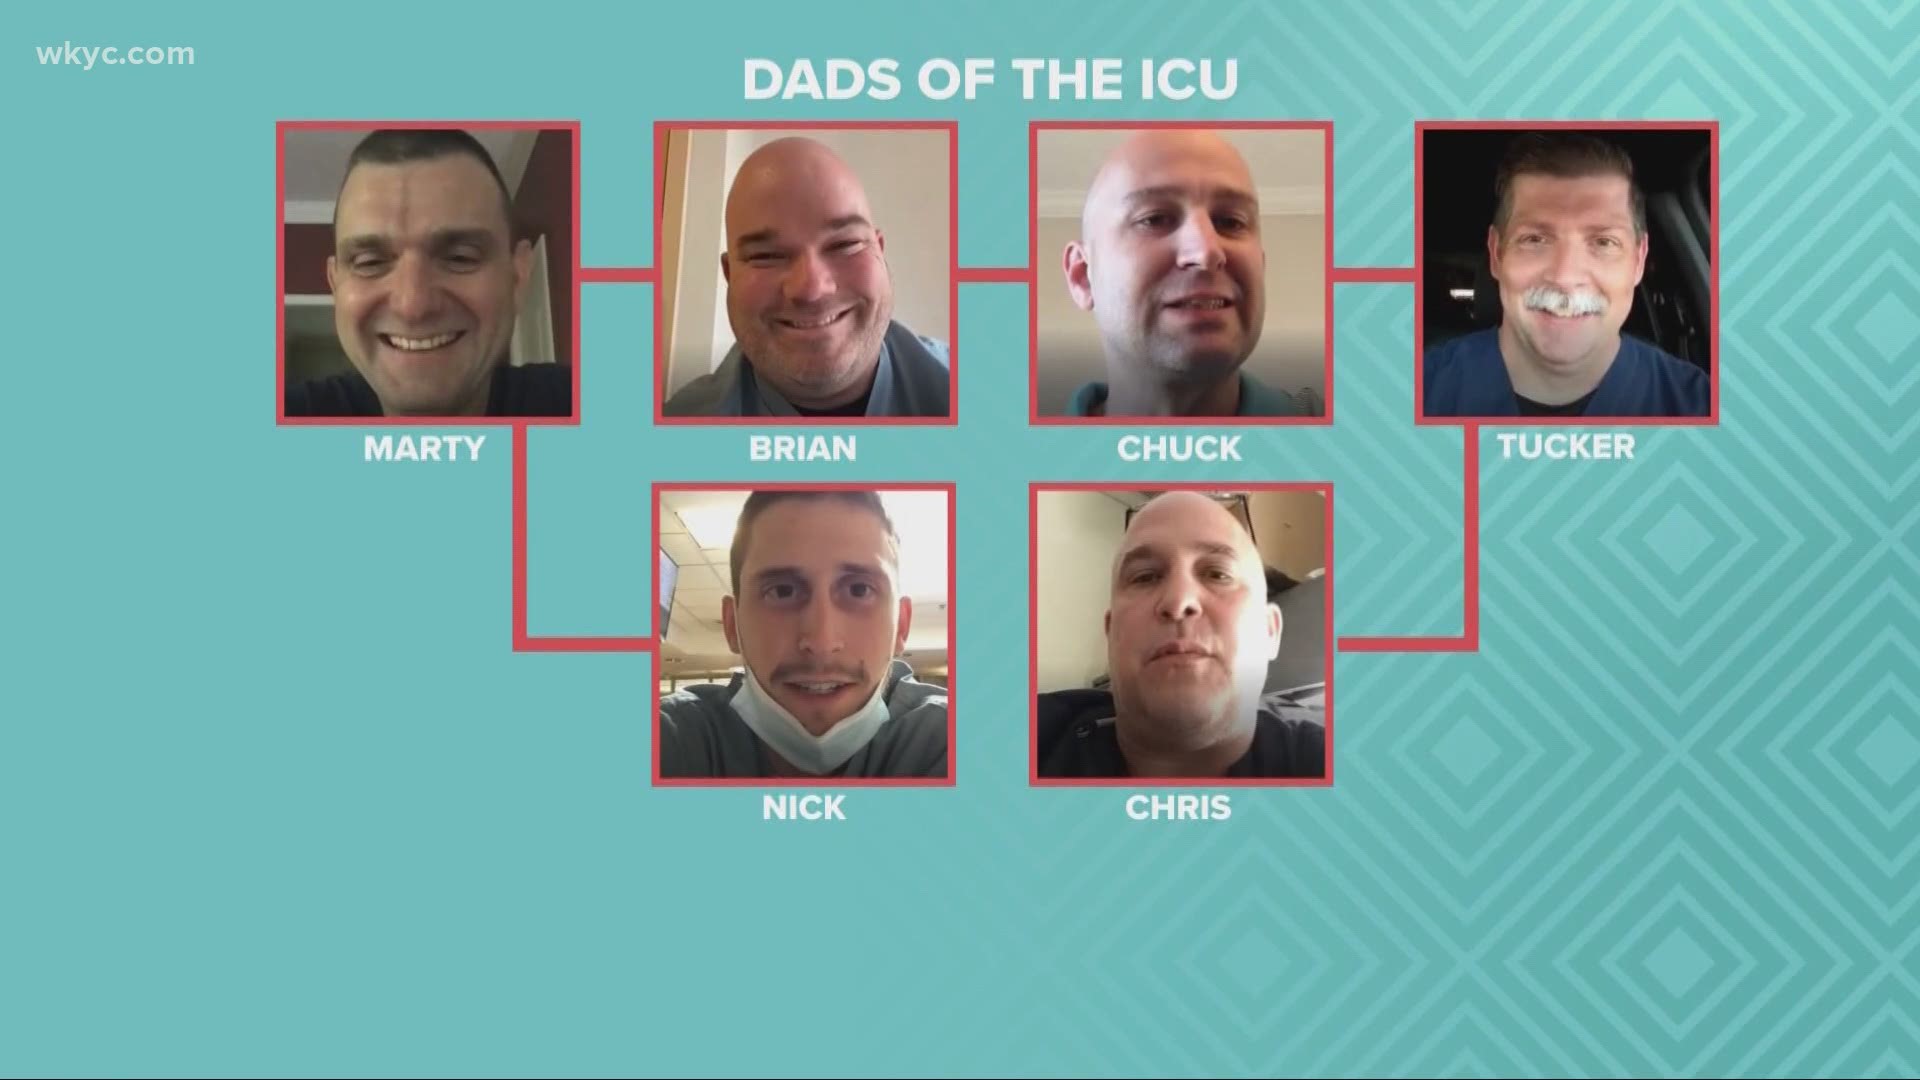 The hospitals COVID-19 ICU is home to a group of great fathers & friends. Jay Crawford reports.